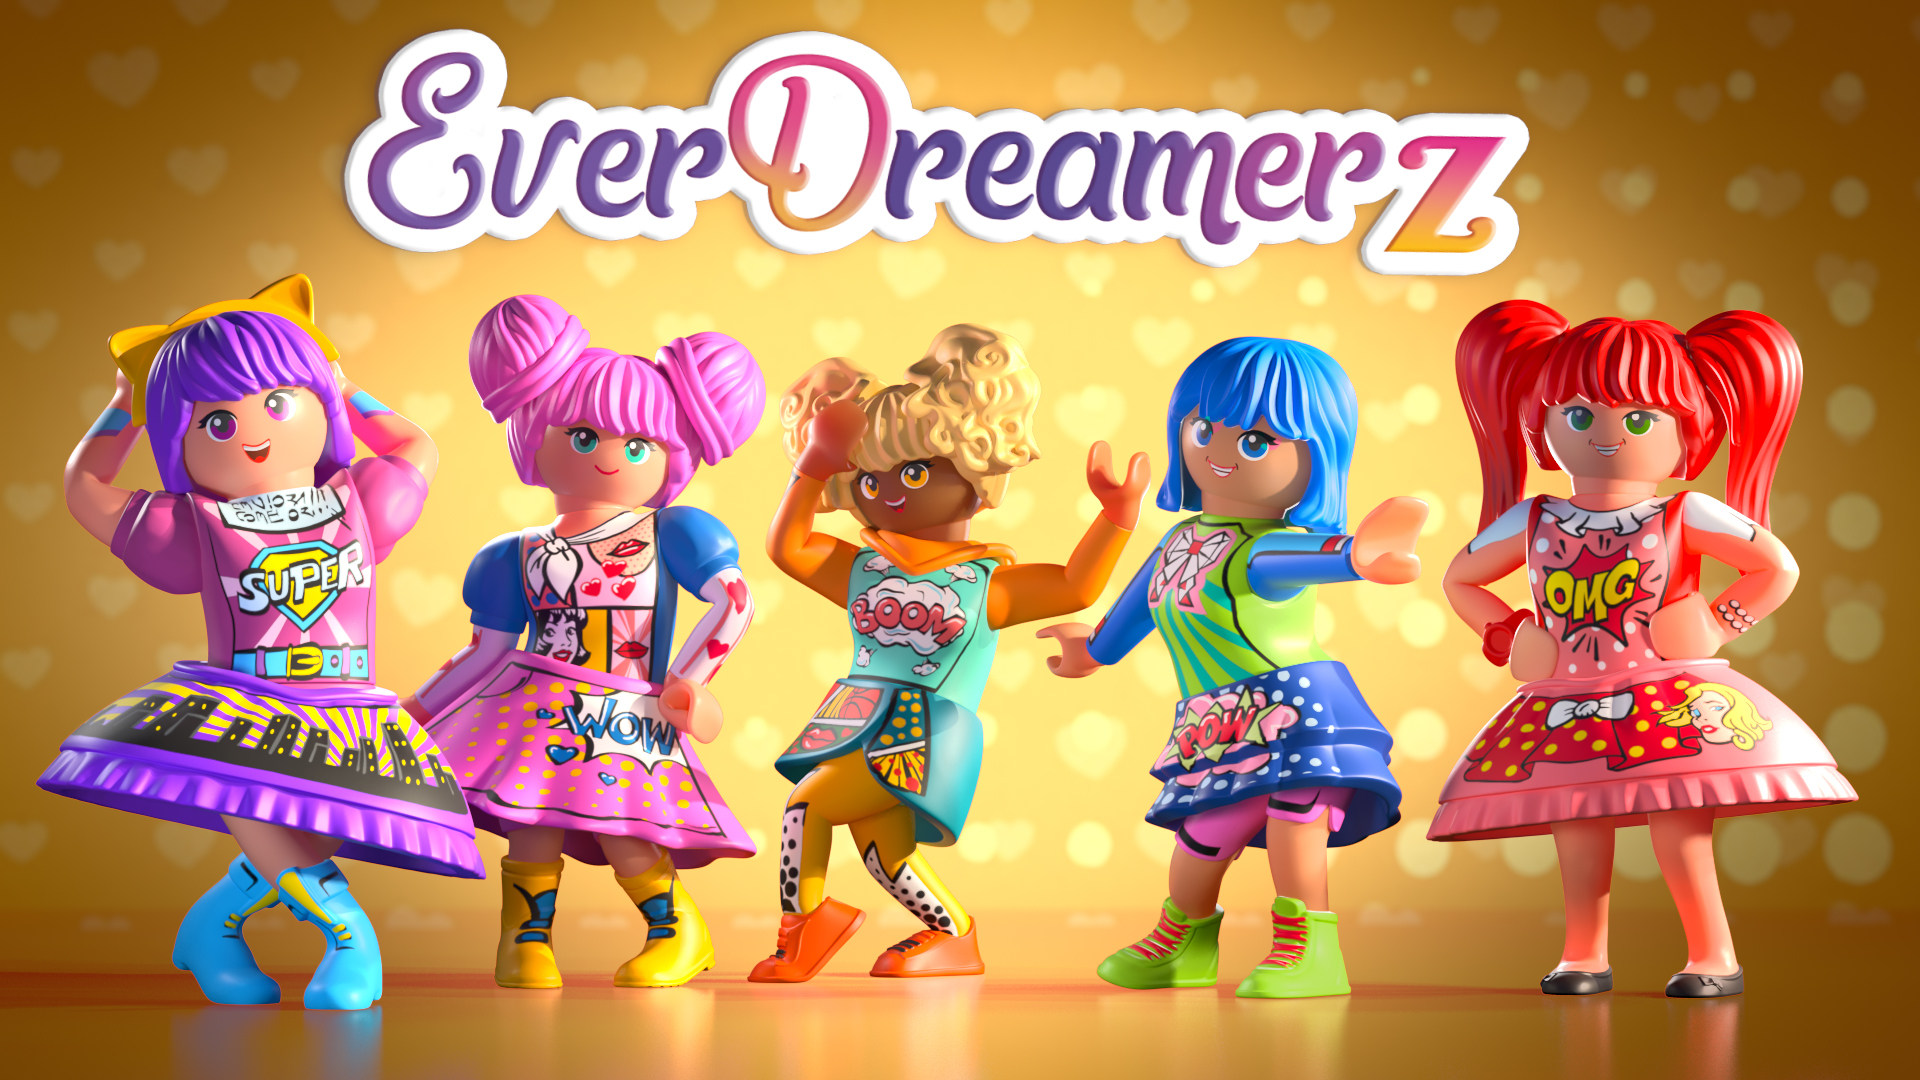 meest Integreren halsband PLAYMOBIL trên Twitter: "The #EverDreamerz are finally back! 🎉😍 This  time, the five friends are transported to Edwina's dream world - COMIC  WORLD! 💛🎨 Now available in the PLAYMOBIL Online Shop and